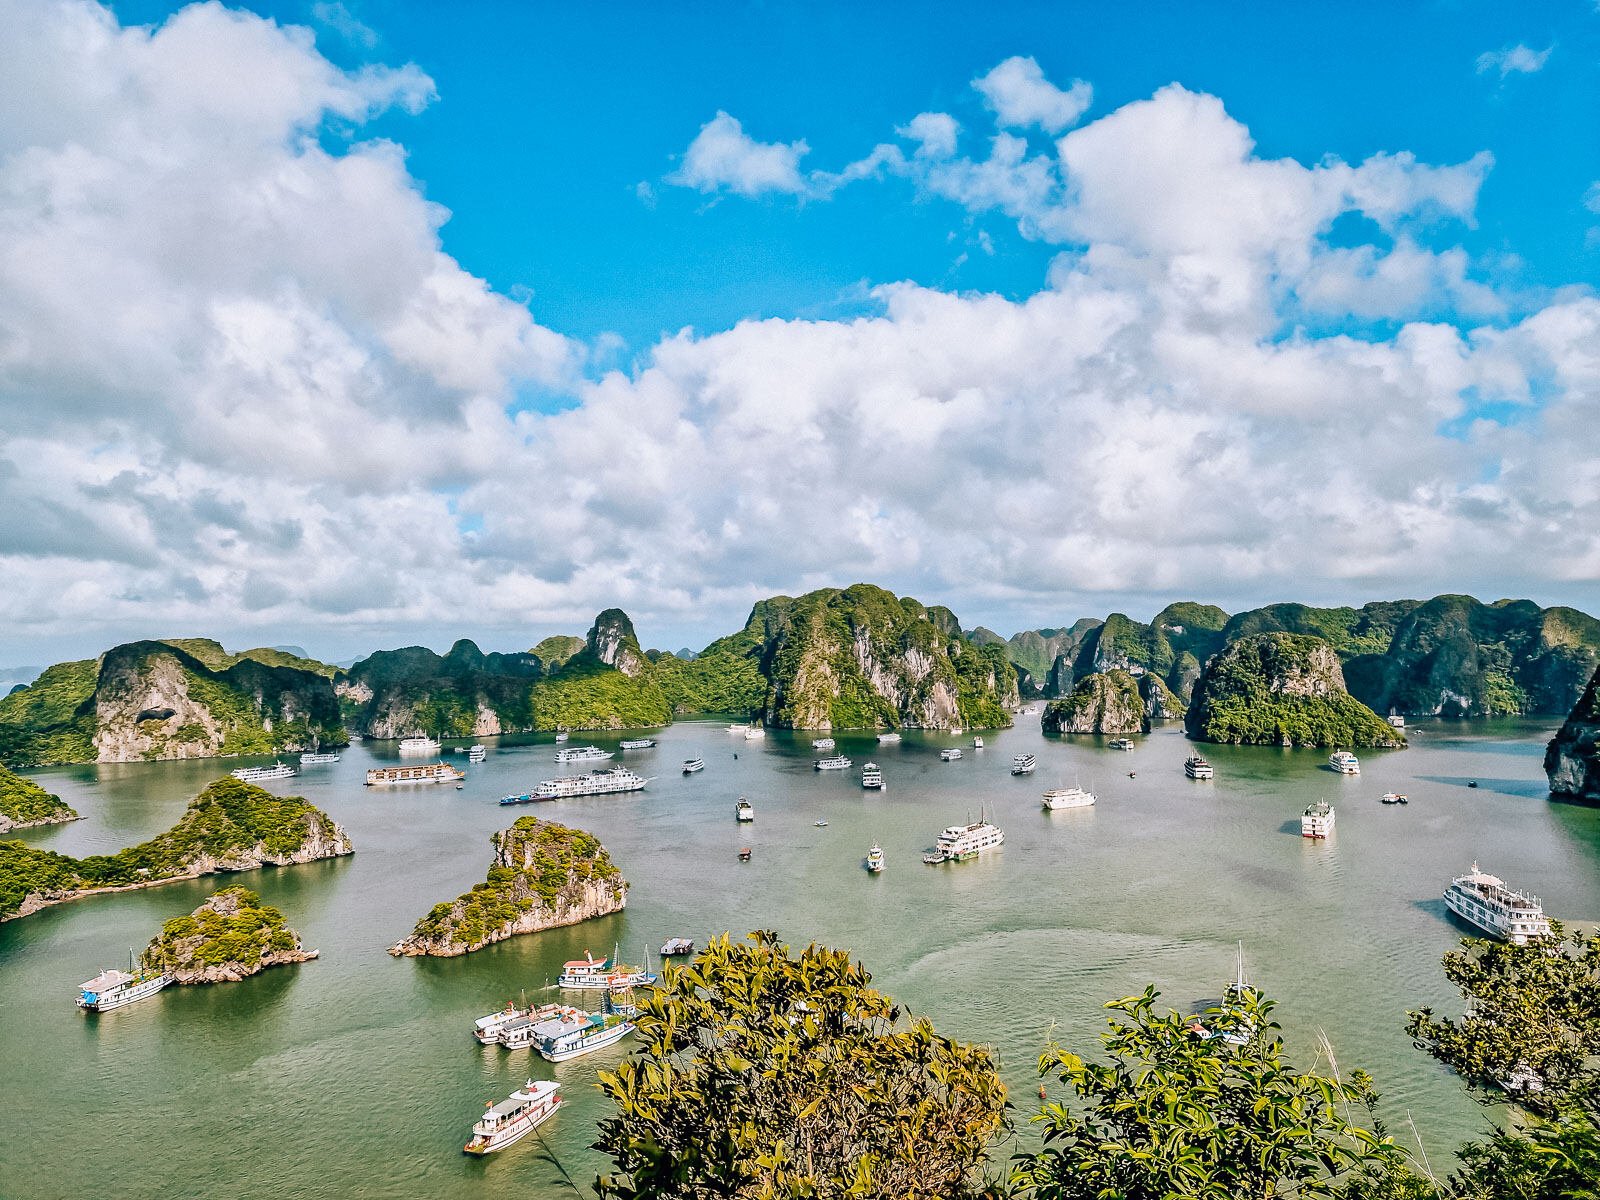 boats in the water of Ha Long Bay